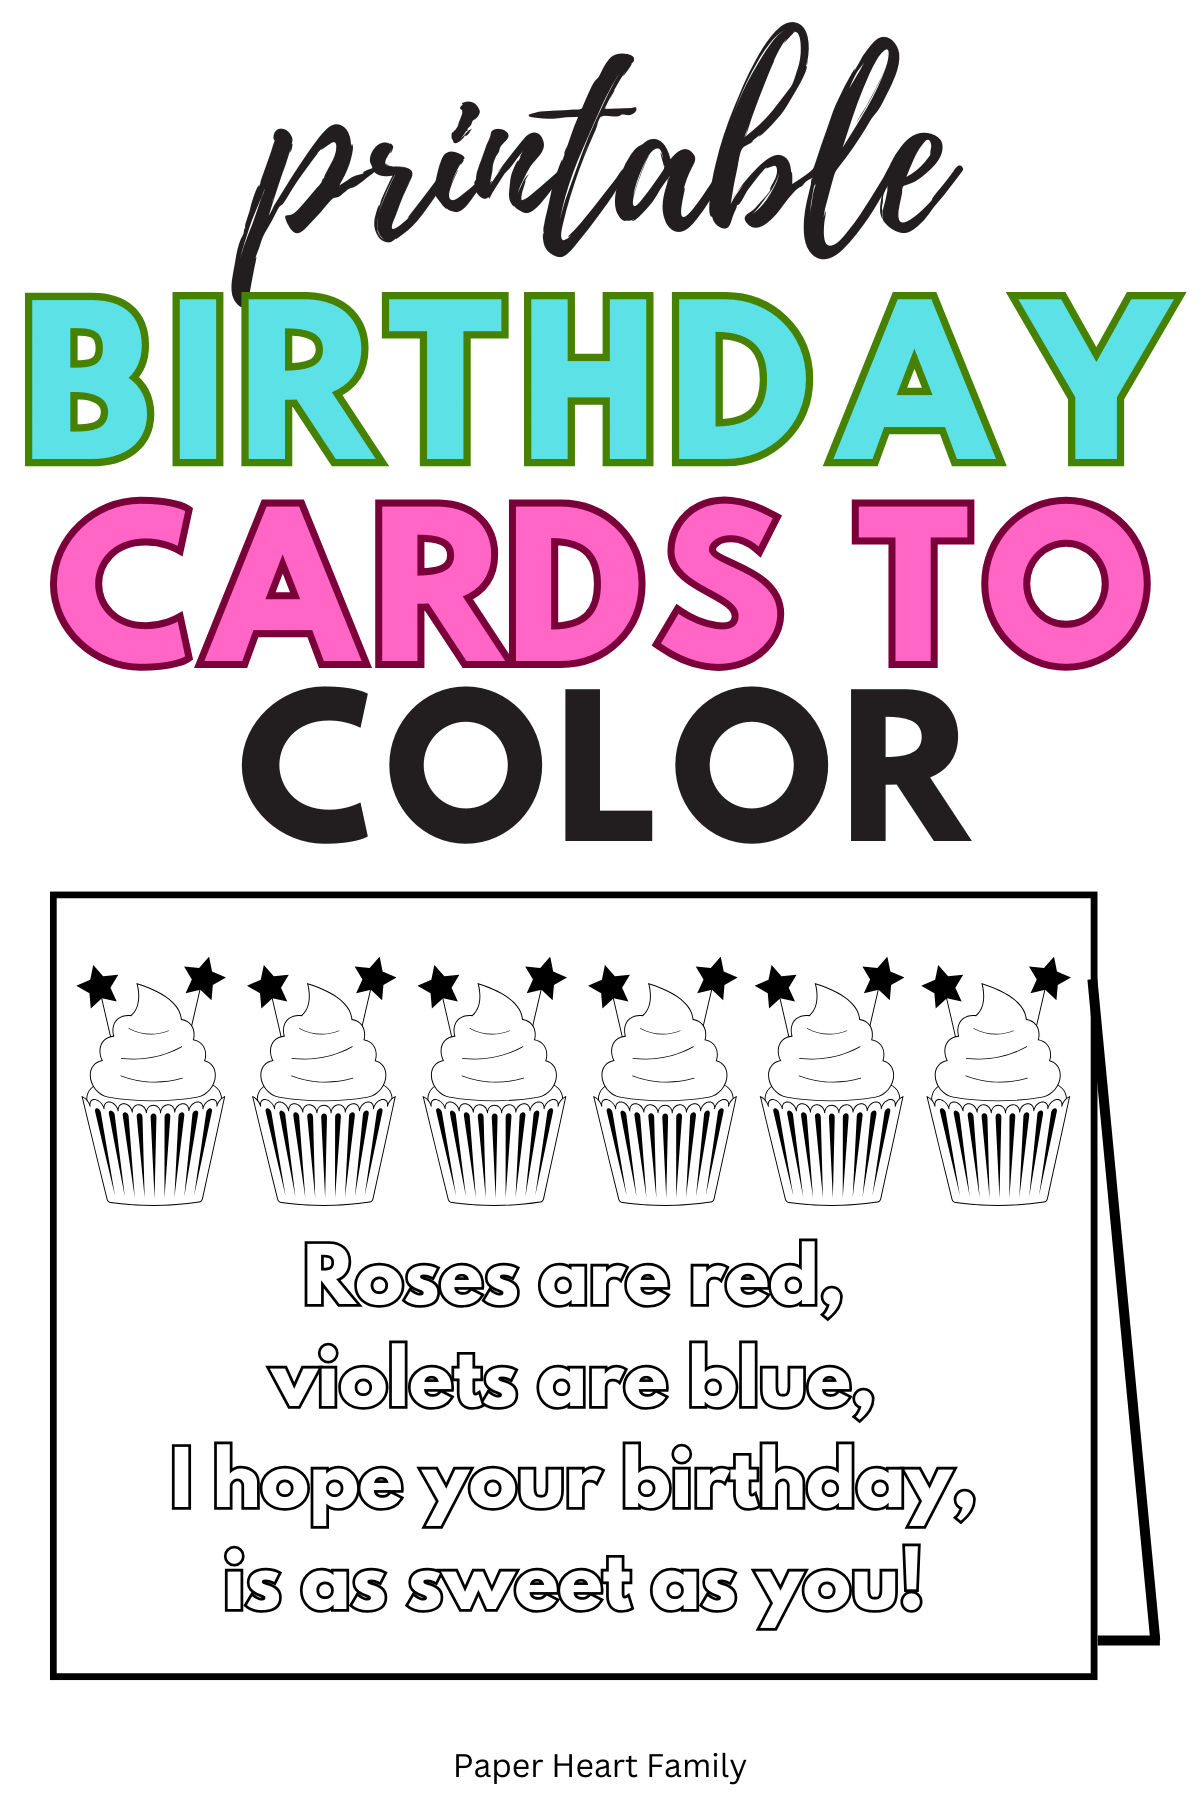 Card with cupcakes graphics that says "Roses are red, violets are blue, I hope your birthday is as sweet as you!"